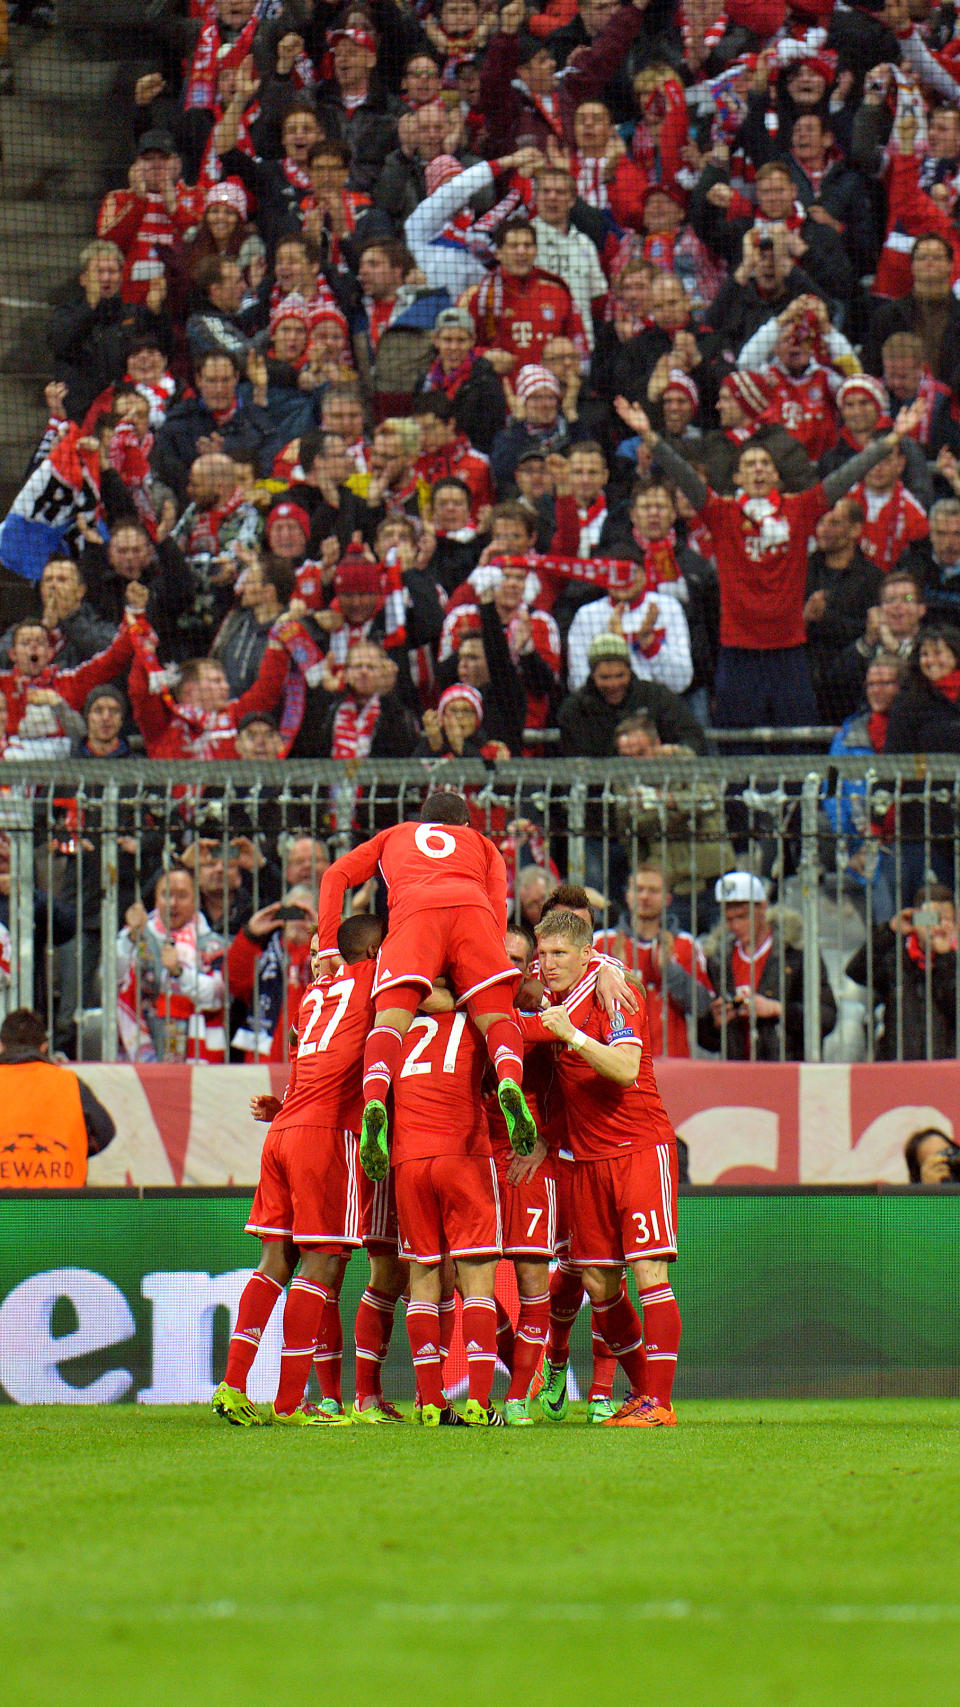 Bayern's players celebrate after scoring during the Champions League round of the last 16 second leg soccer match between FC Bayern Munich and Arsenal FC in Munich, Germany, on Tuesday, March 11. 2014. (AP Photo/Kerstin Joensson)